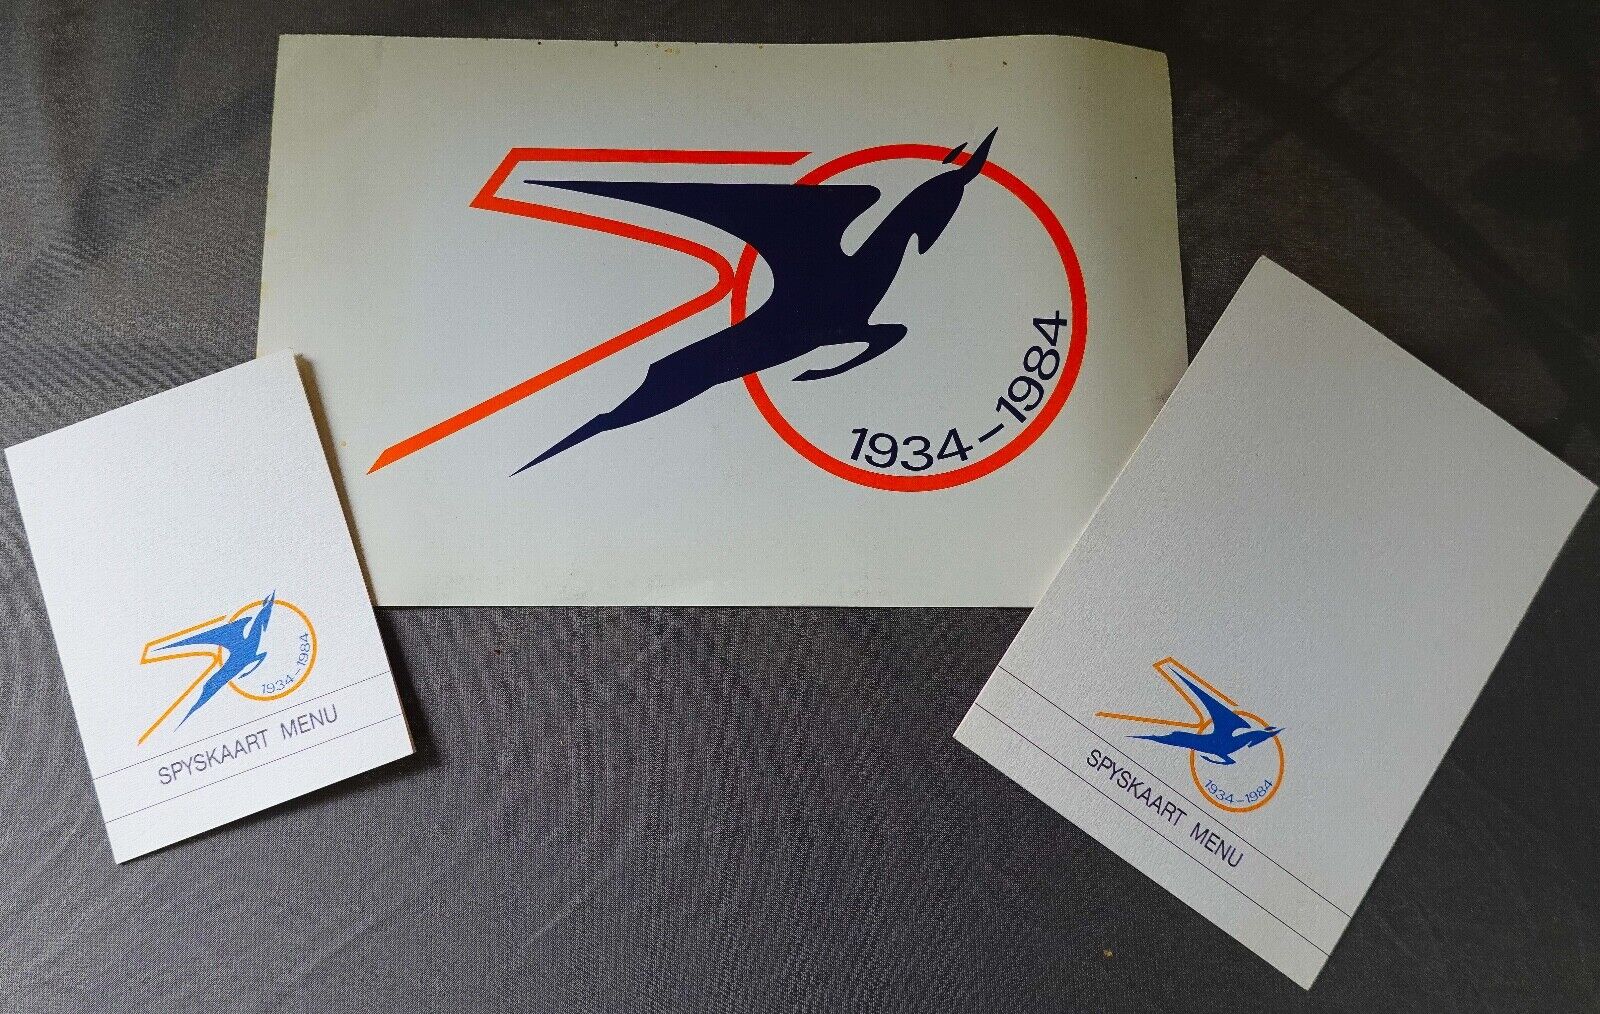 South Africn Airways 50th Anniversary (1984) logo and special menus